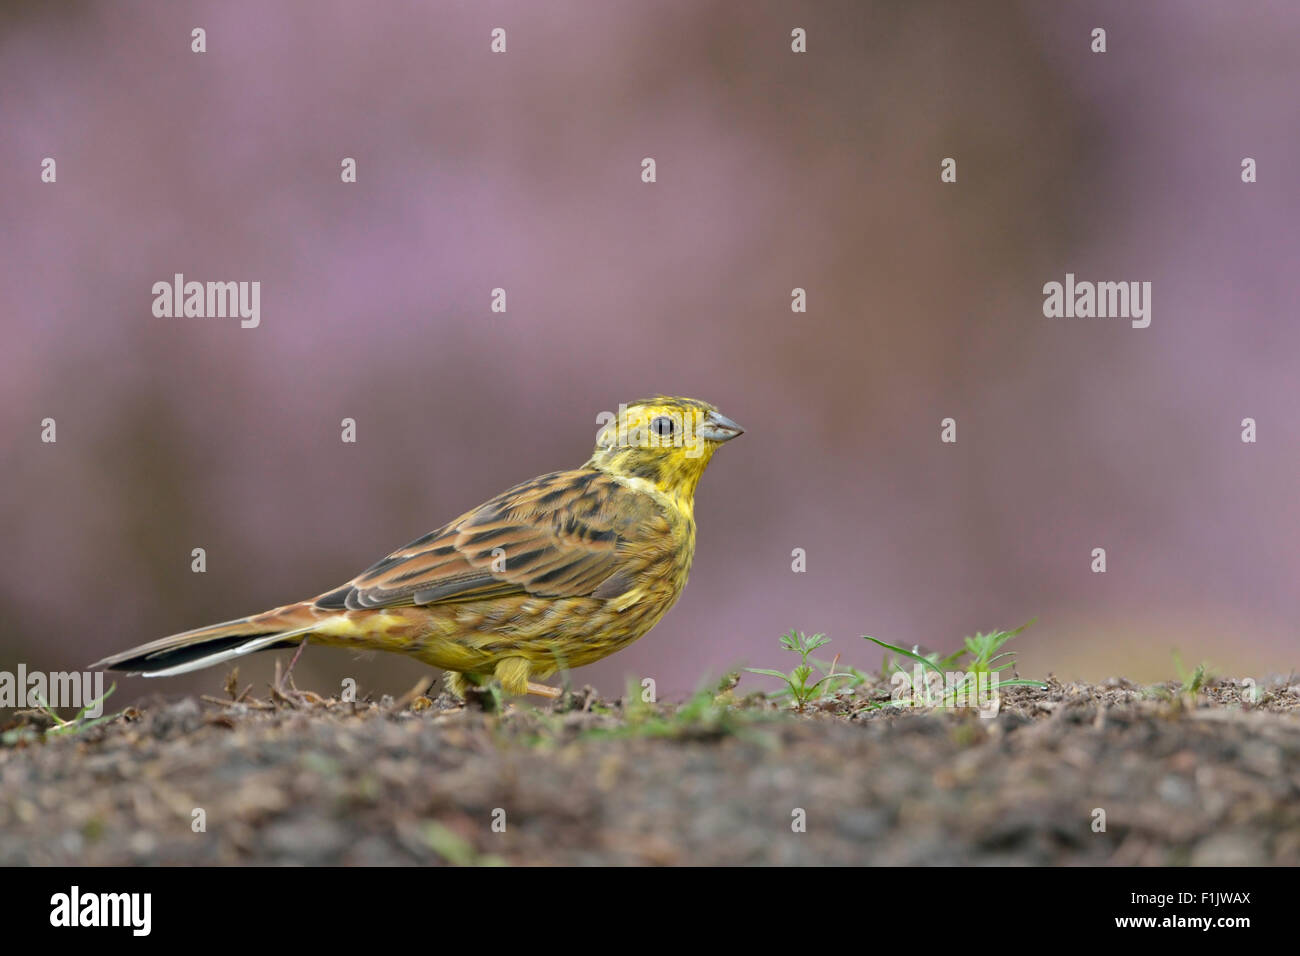 Yellowhammer / Goldammer ( Emberiza citrinella ) sits on the ground in front of purple blossoming heather. Stock Photo